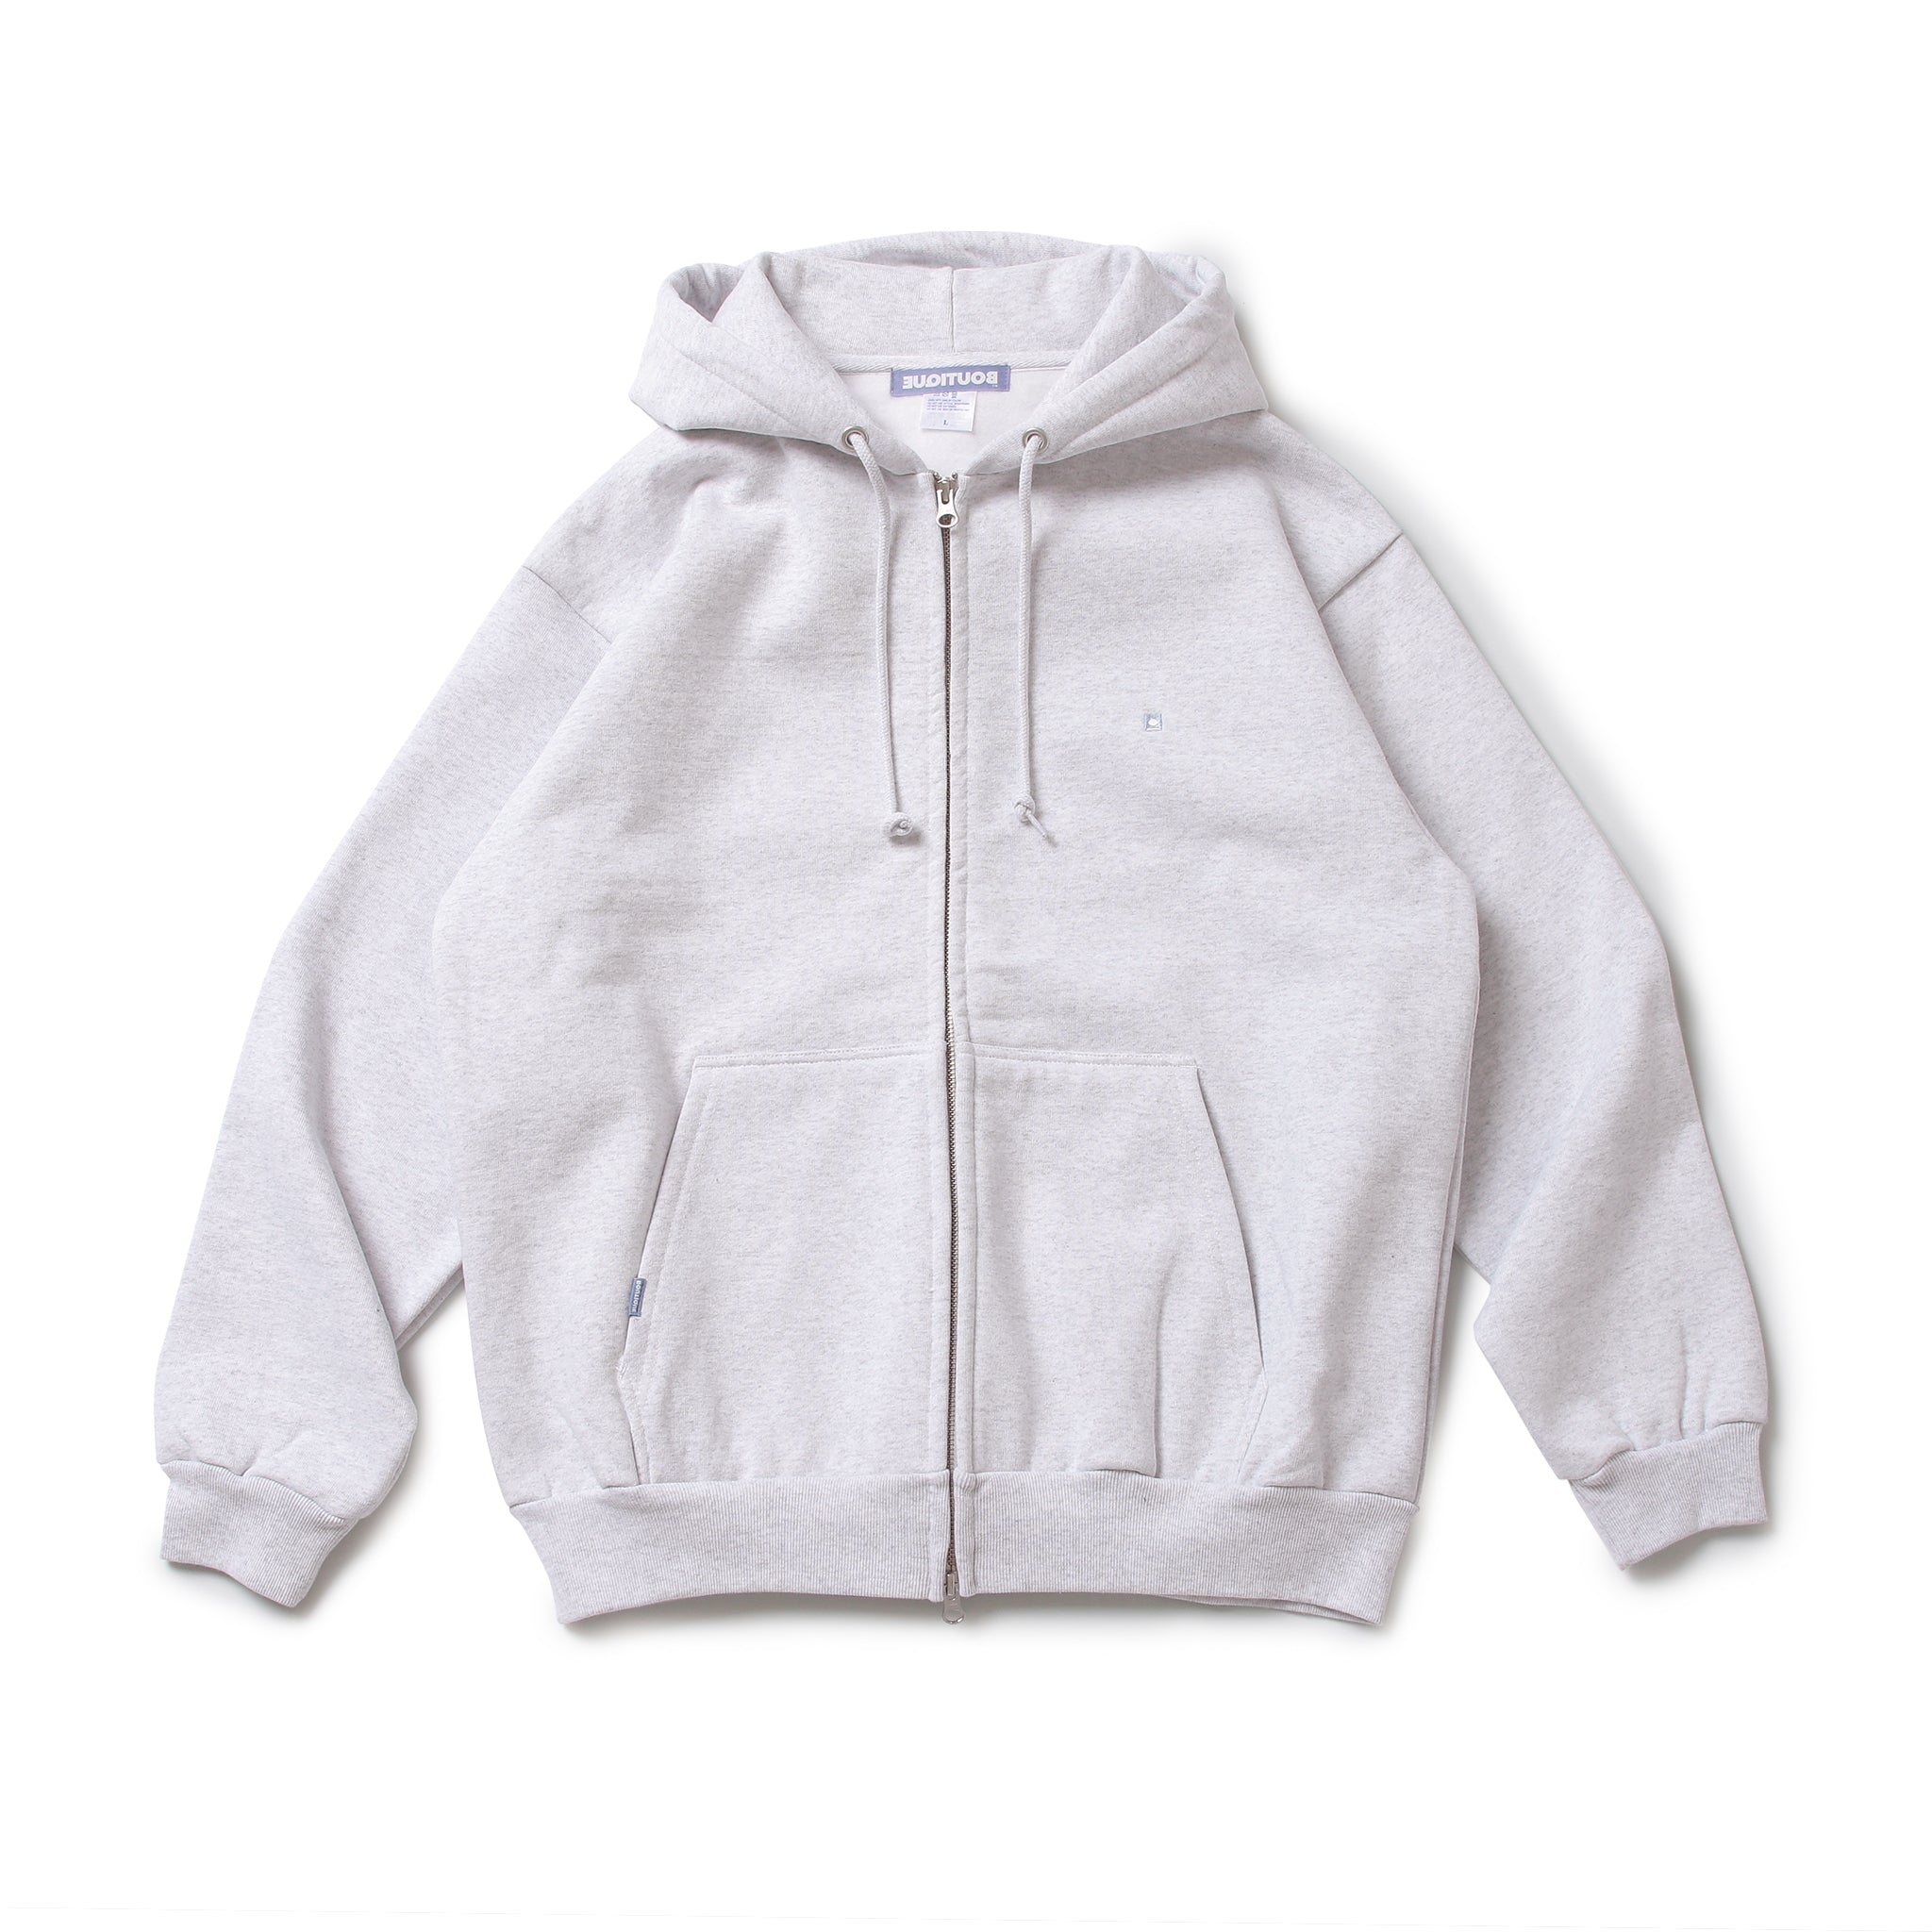 IT'S OUR TINY STORE ZIP UP HOODIE（イッツアワータイニーストアジップアップパーカー）